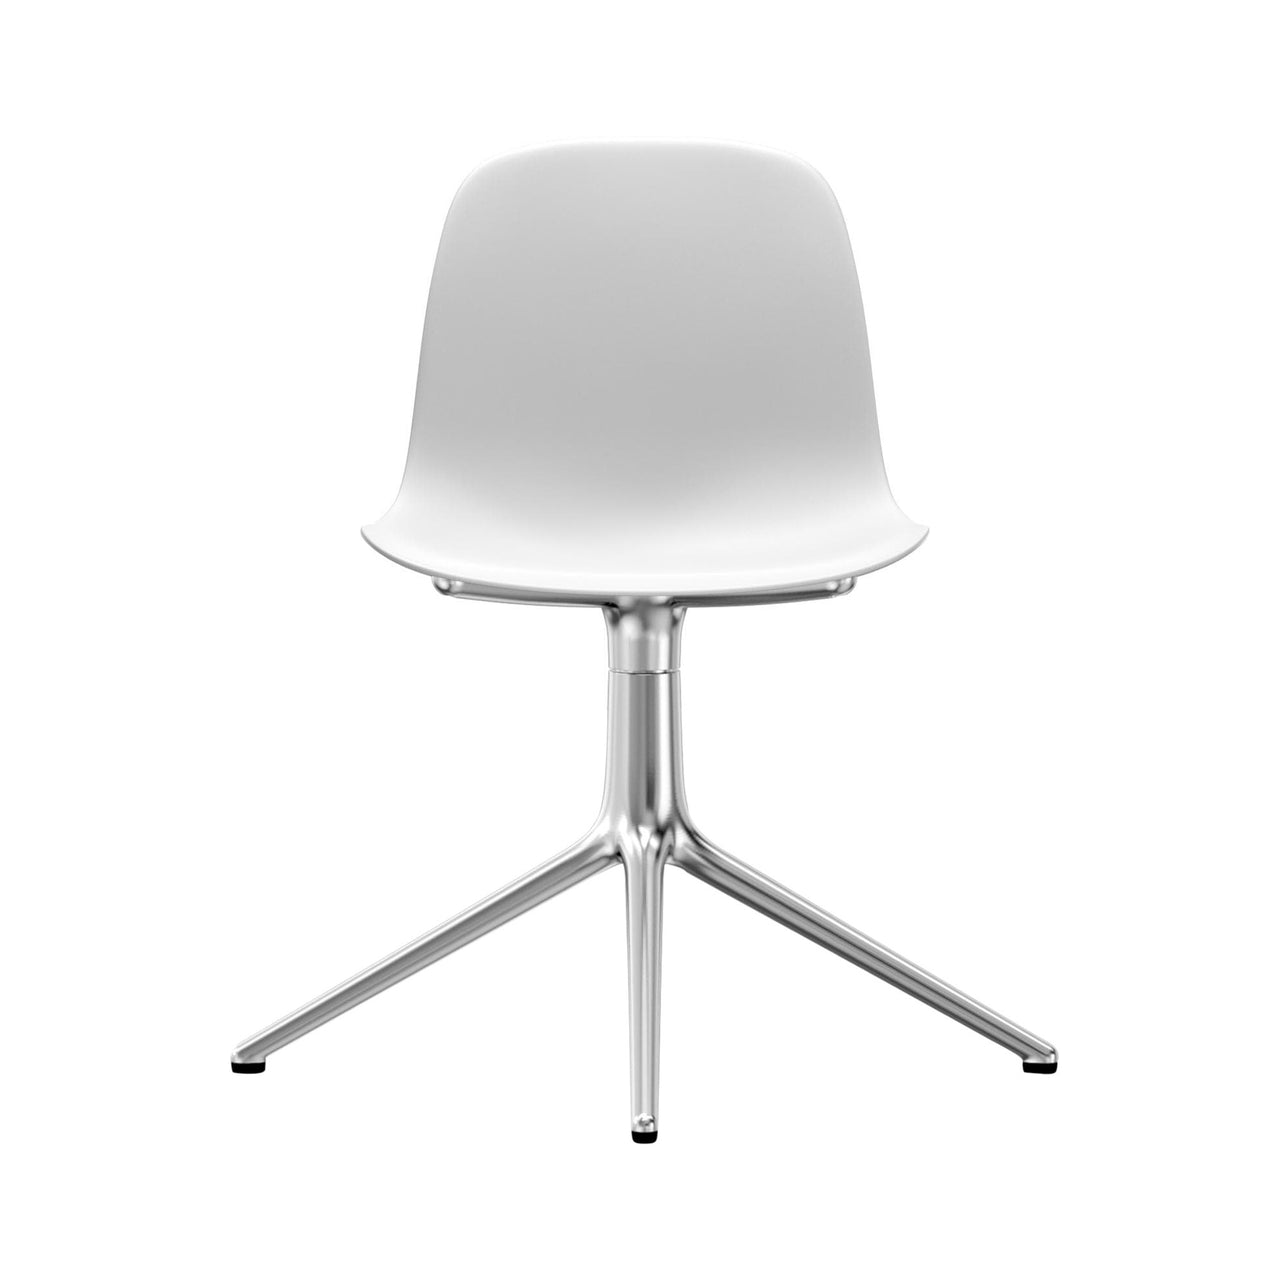 Form Chair: Swivel + White + Aluminum + Without Casters